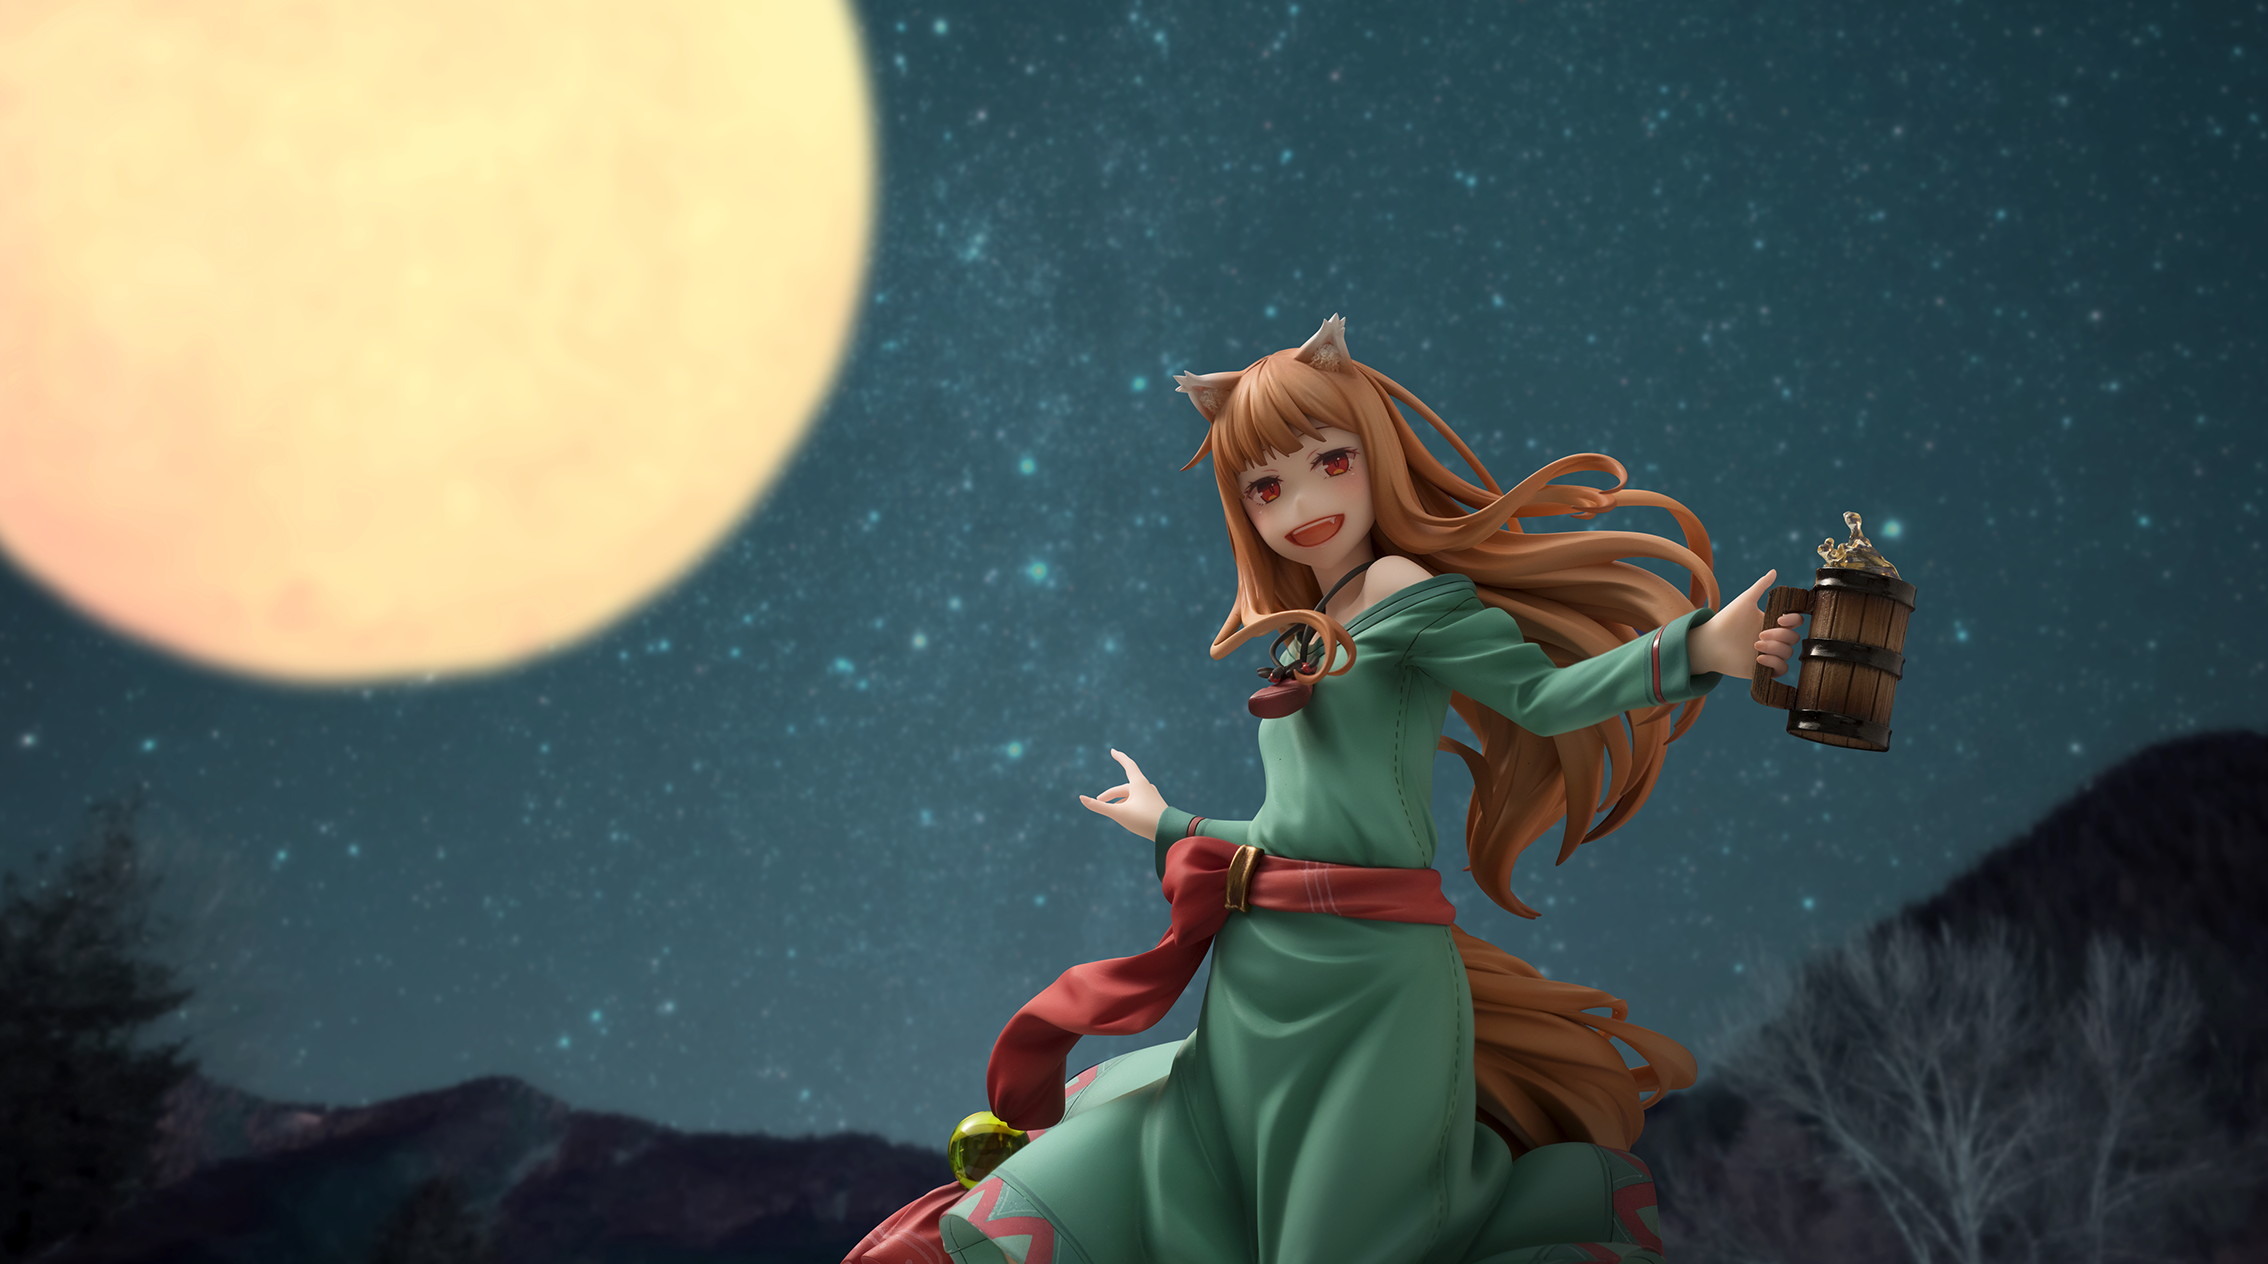 spice-and-wolf-holo-18-scale-figure-10th-anniversary-ver-re-run image count 10